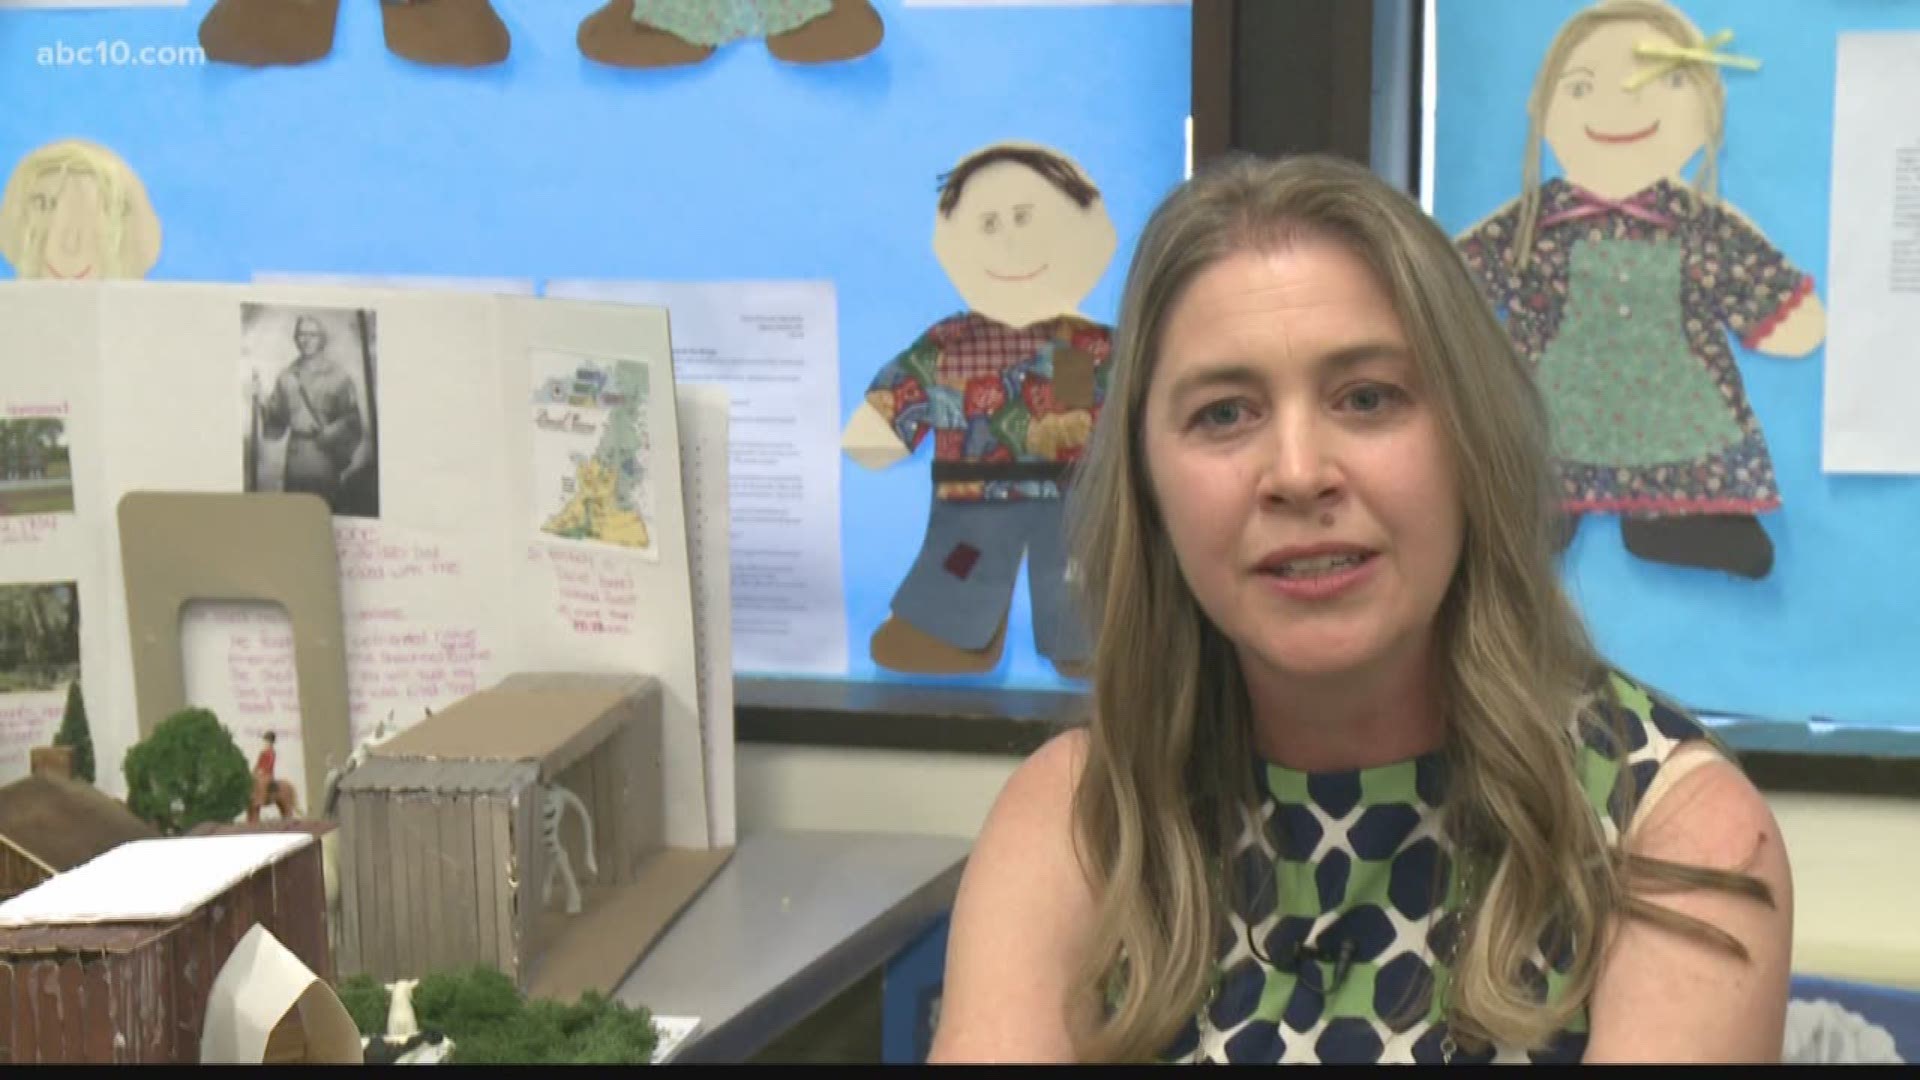 Lisa Hillstrom is the 3rd Grade teacher at Lakewood Elementary School in Lodi and is this month's Teacher of the Month.